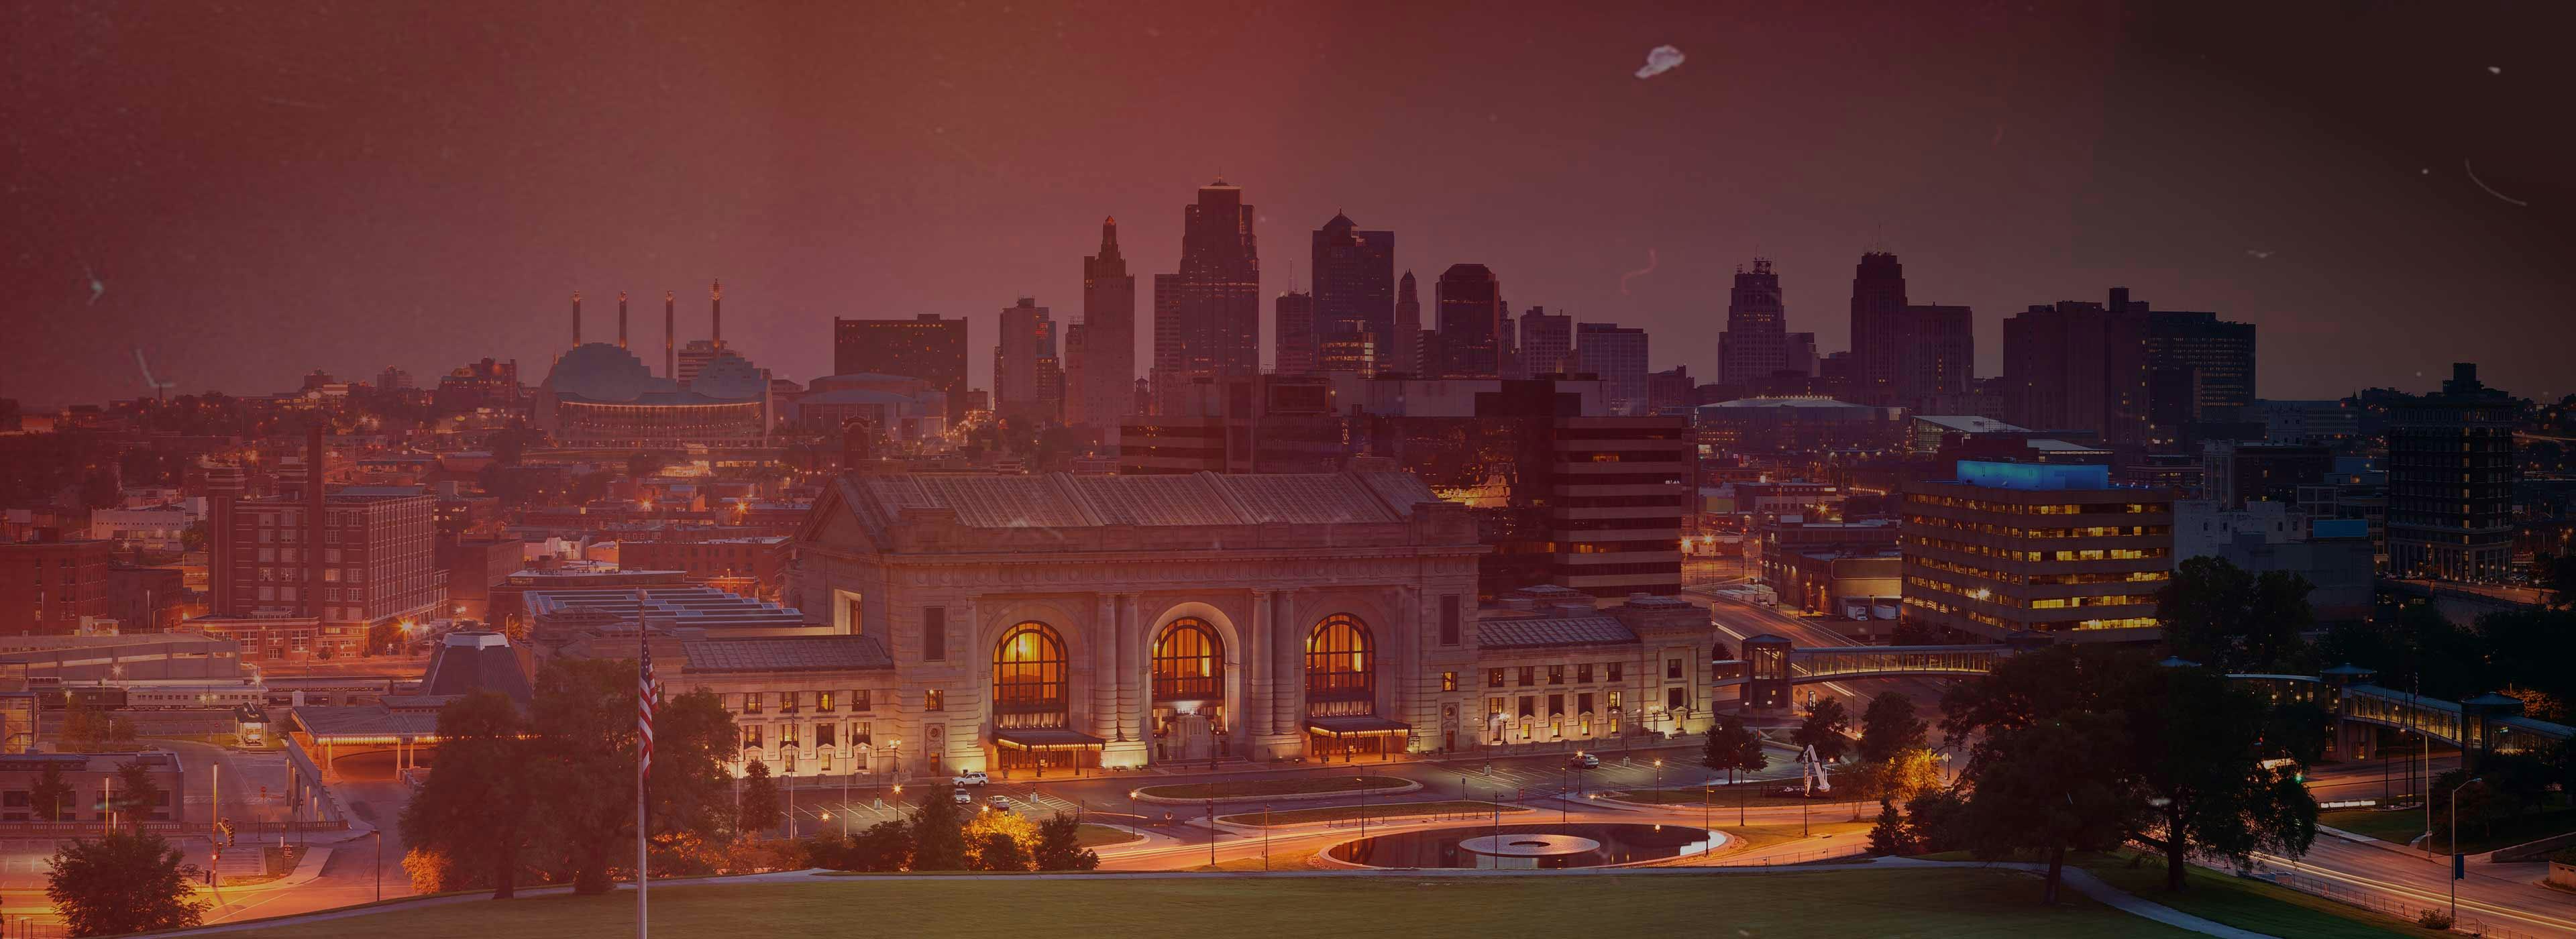 Kansas City skyline with Union Station in the forefront